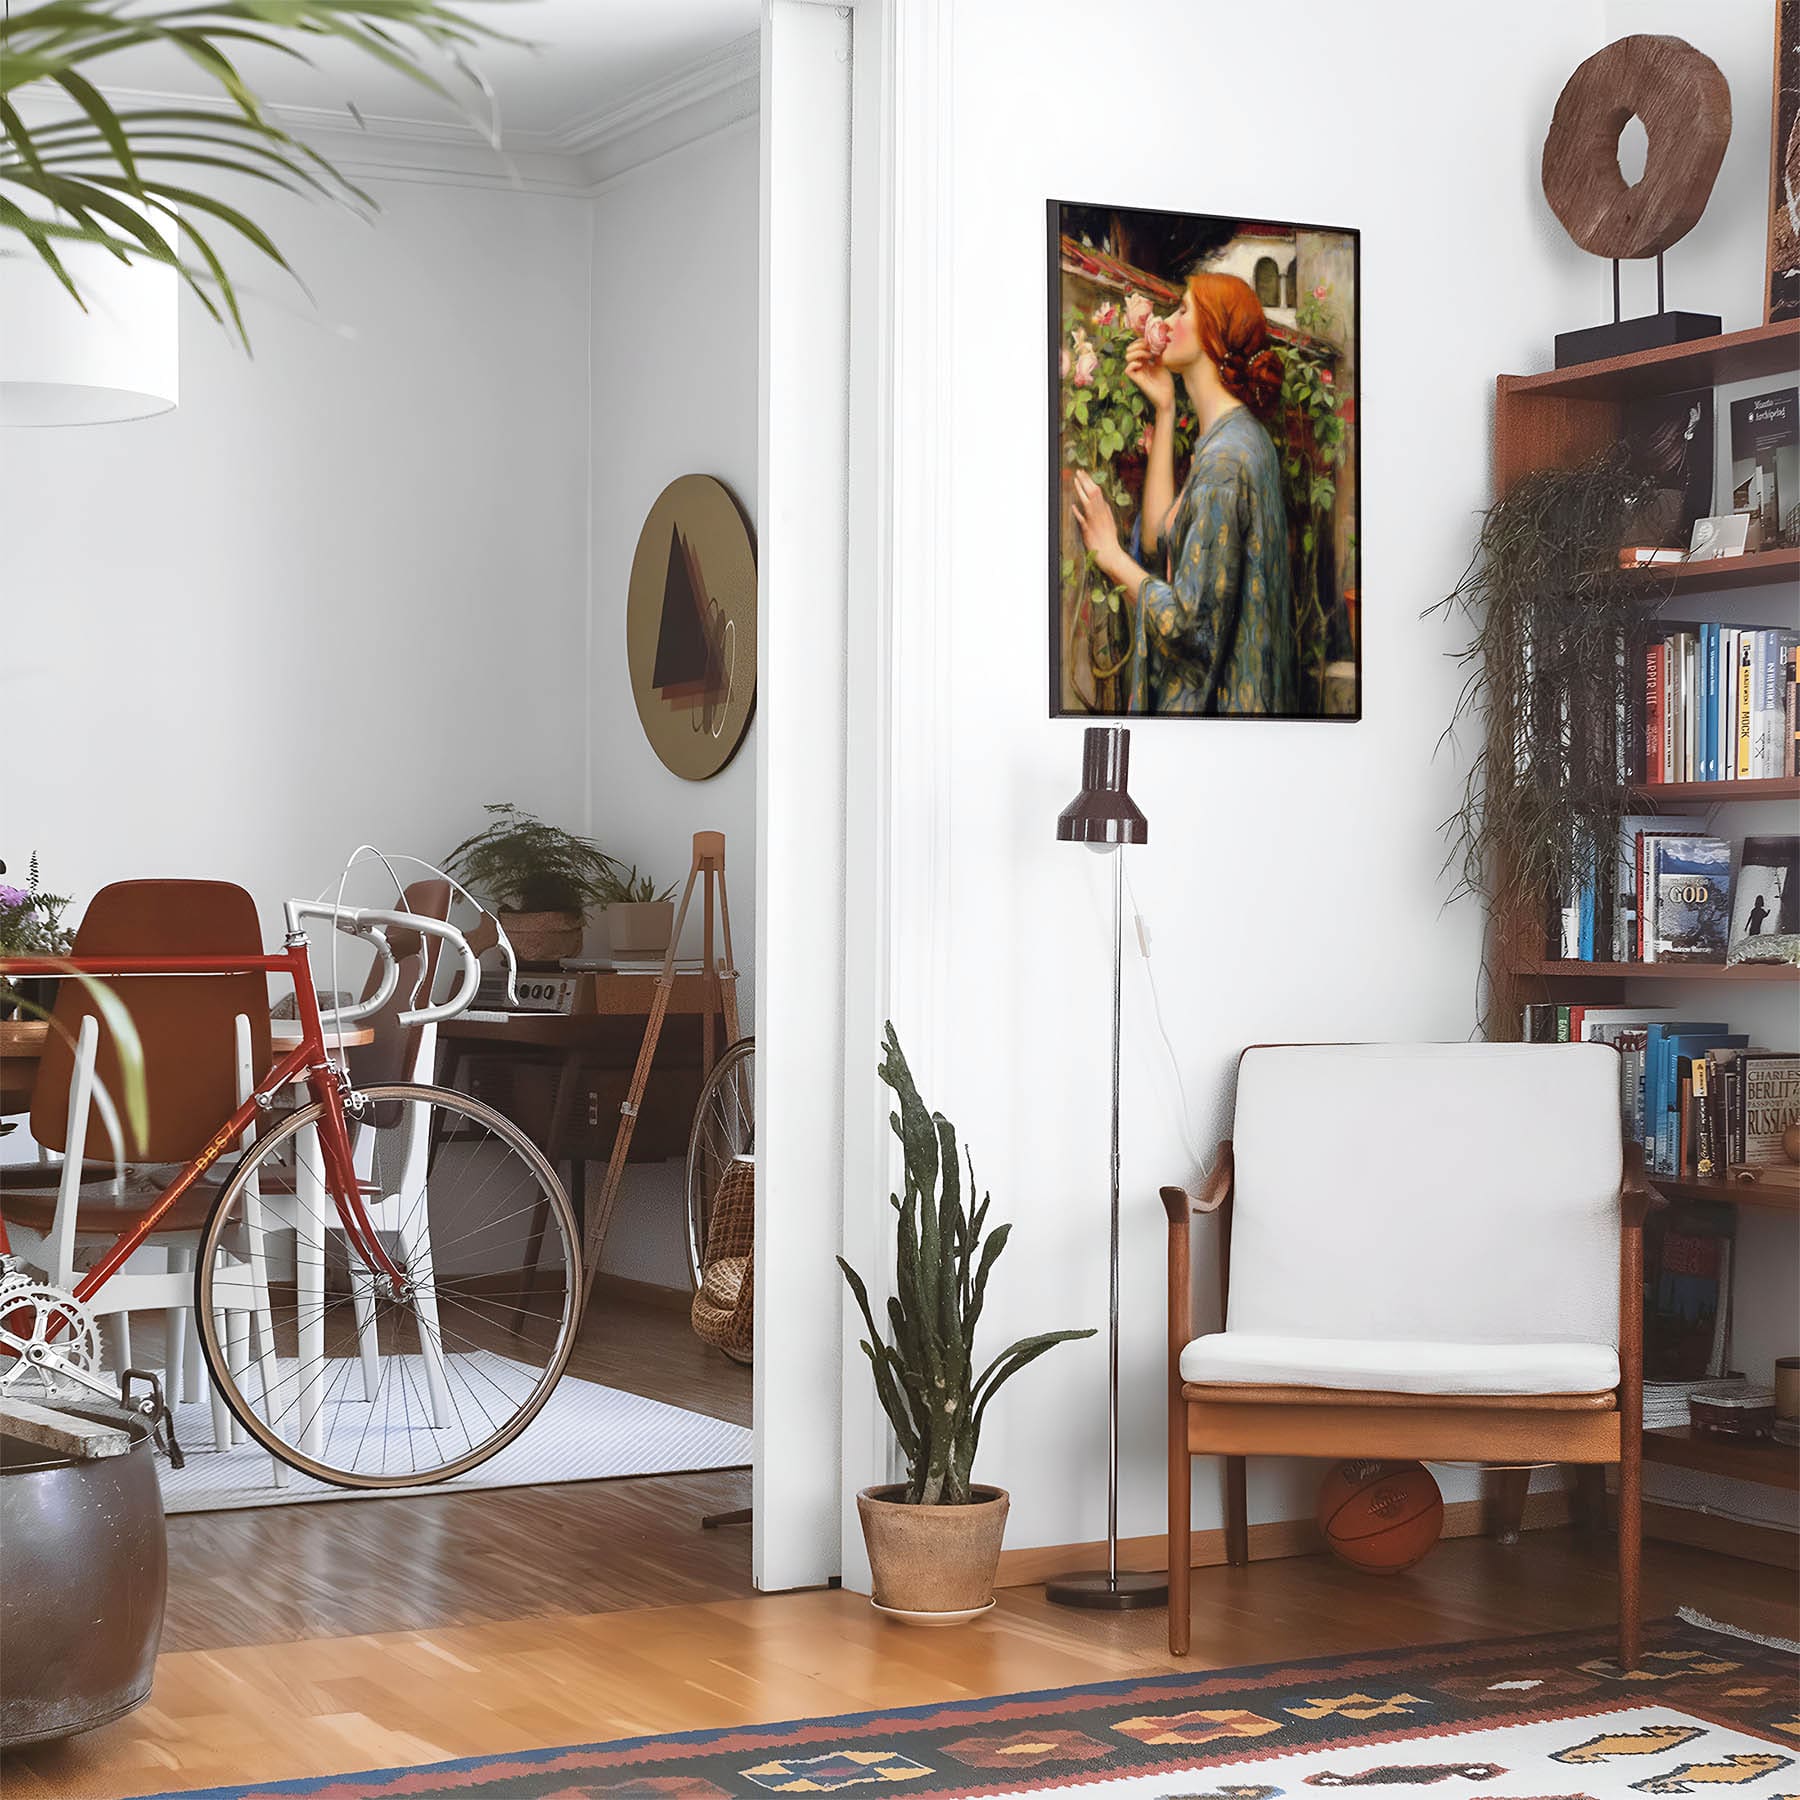 Eclectic living room with a road bike, bookshelf and house plants that features framed artwork of a Woman with Red Hair Smelling a Rose above a chair and lamp